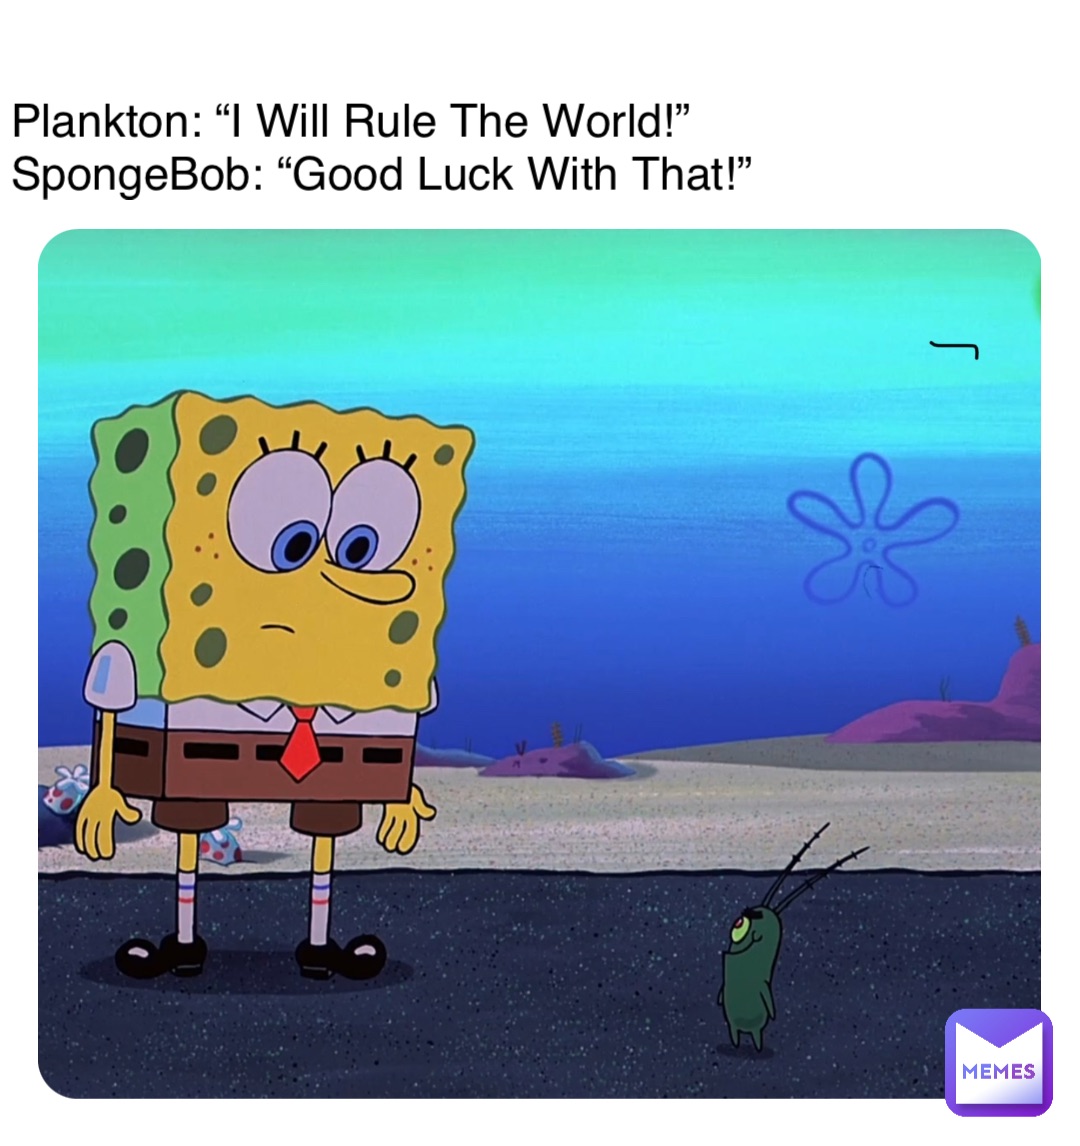 Plankton: “I Will Rule The World!”
SpongeBob: “Good Luck With That!”